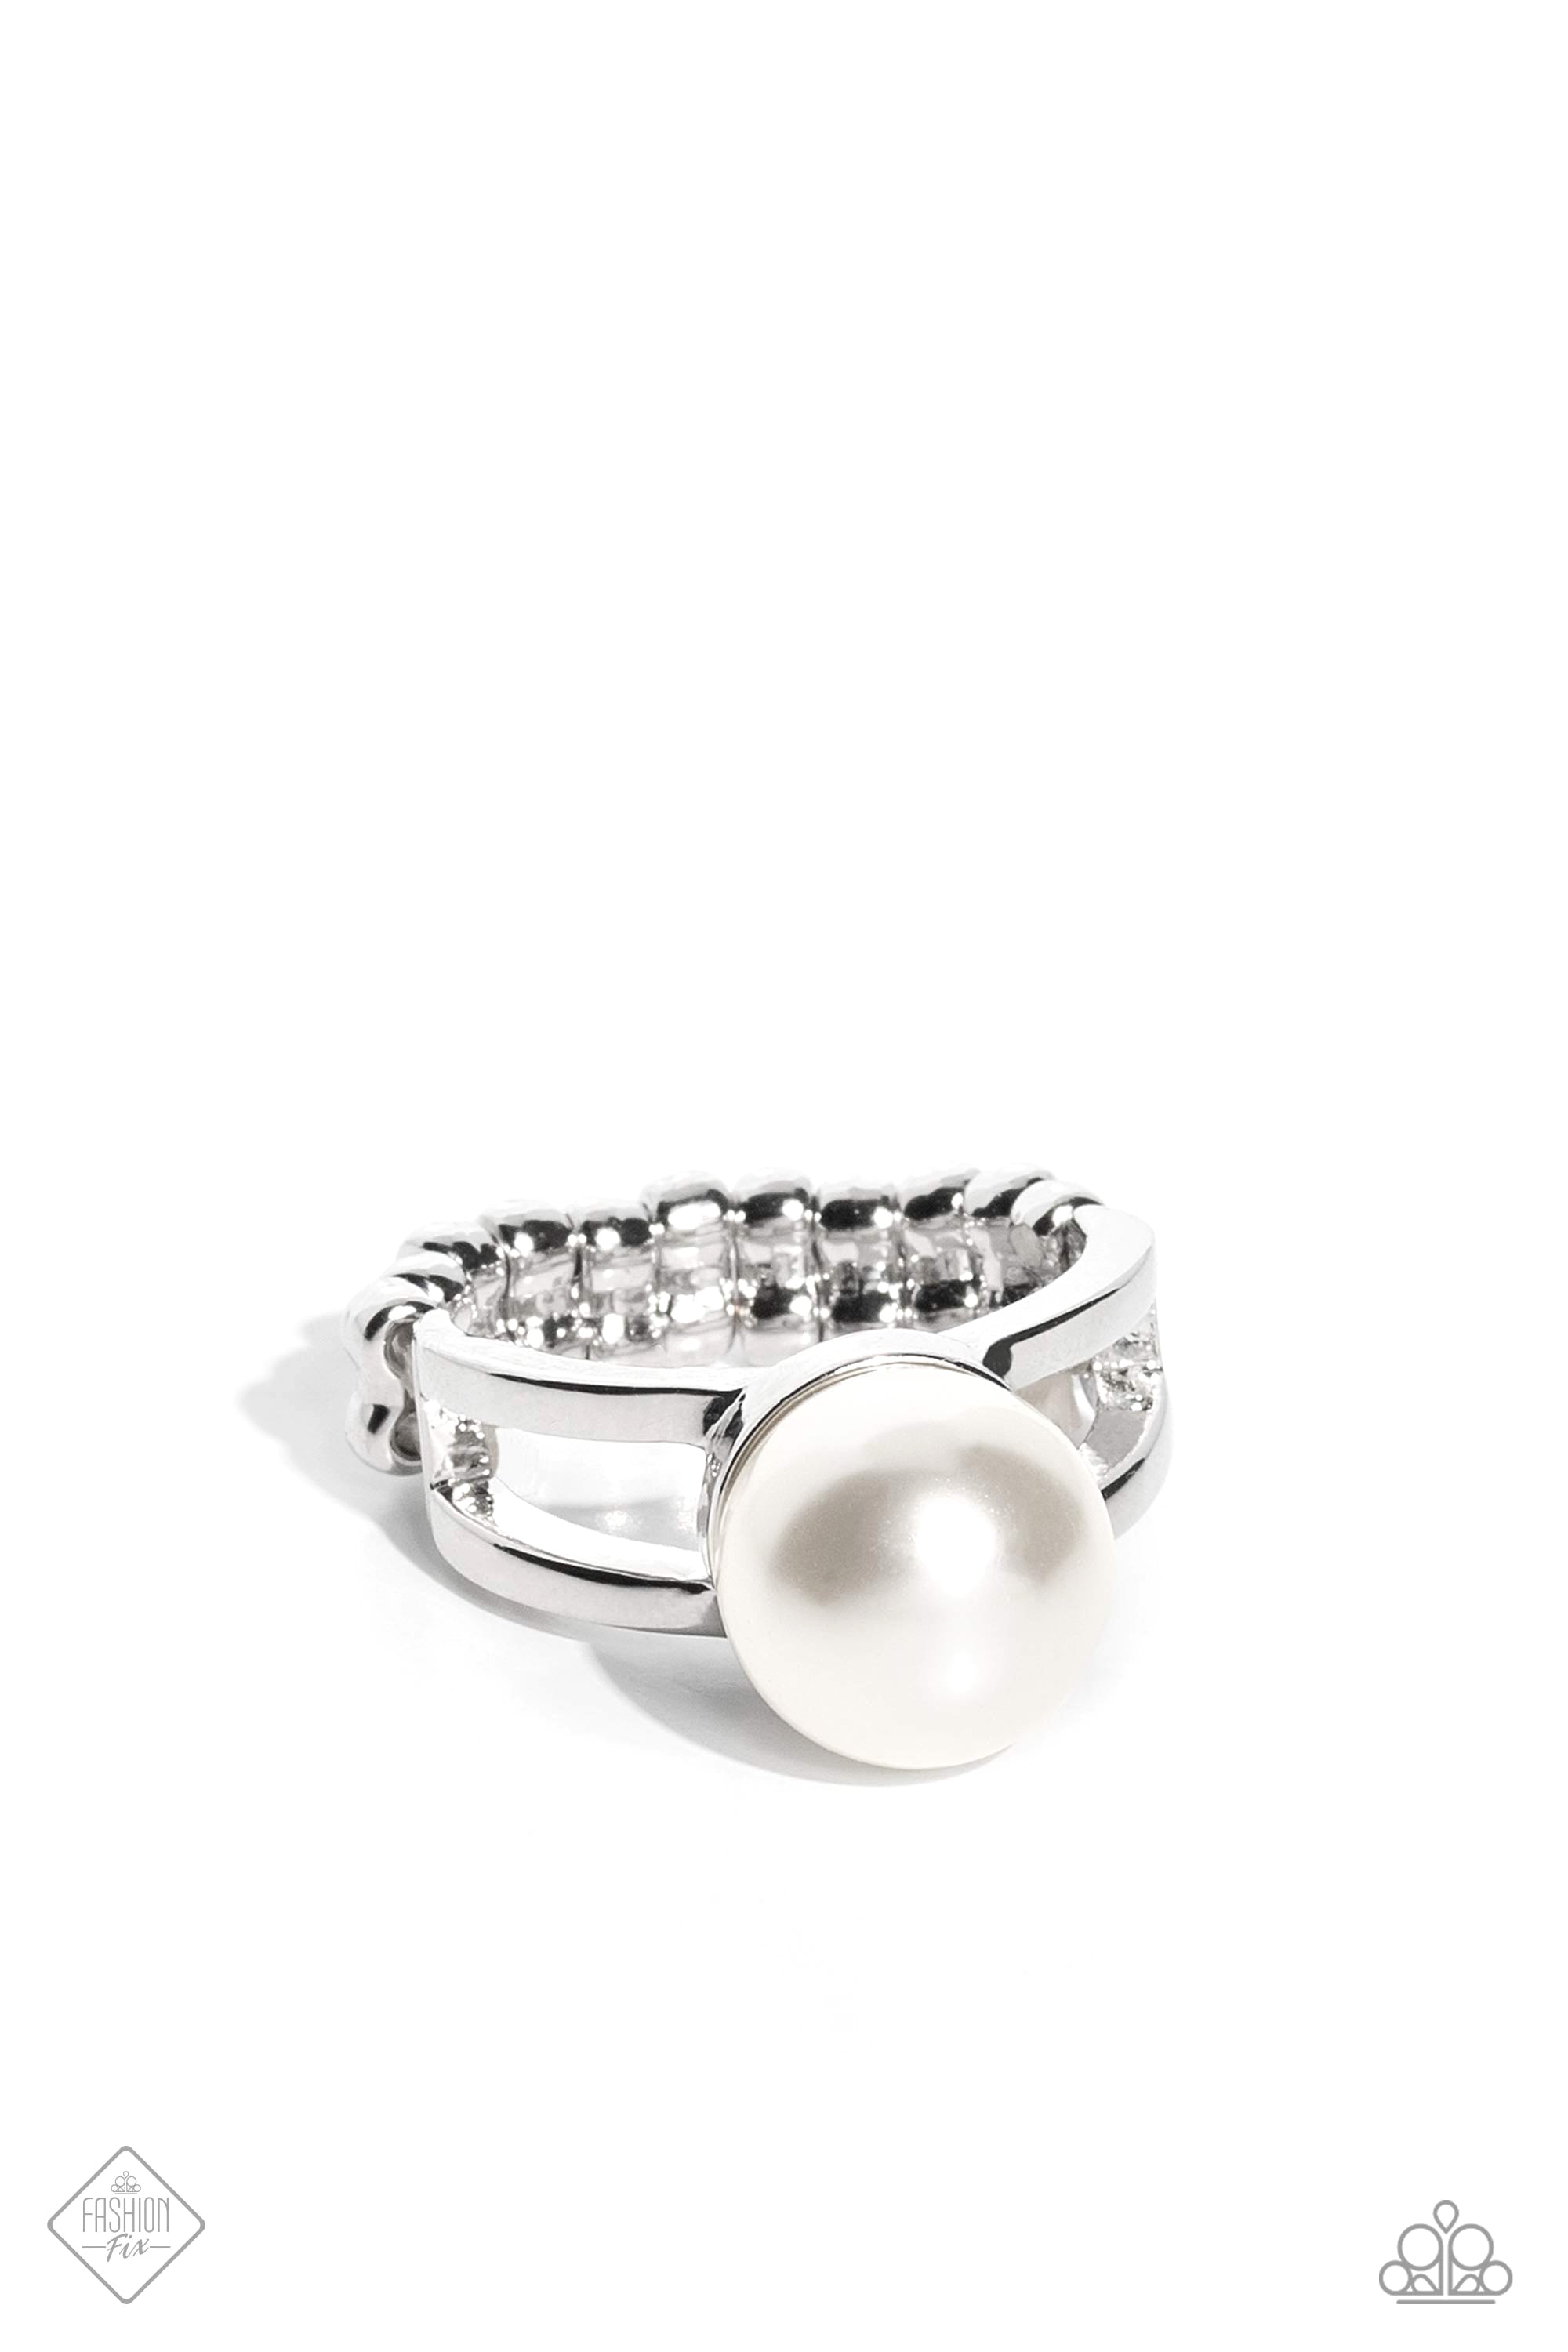 All American PEARL White Ring - Paparazzi Accessories- lightbox - CarasShop.com - $5 Jewelry by Cara Jewels